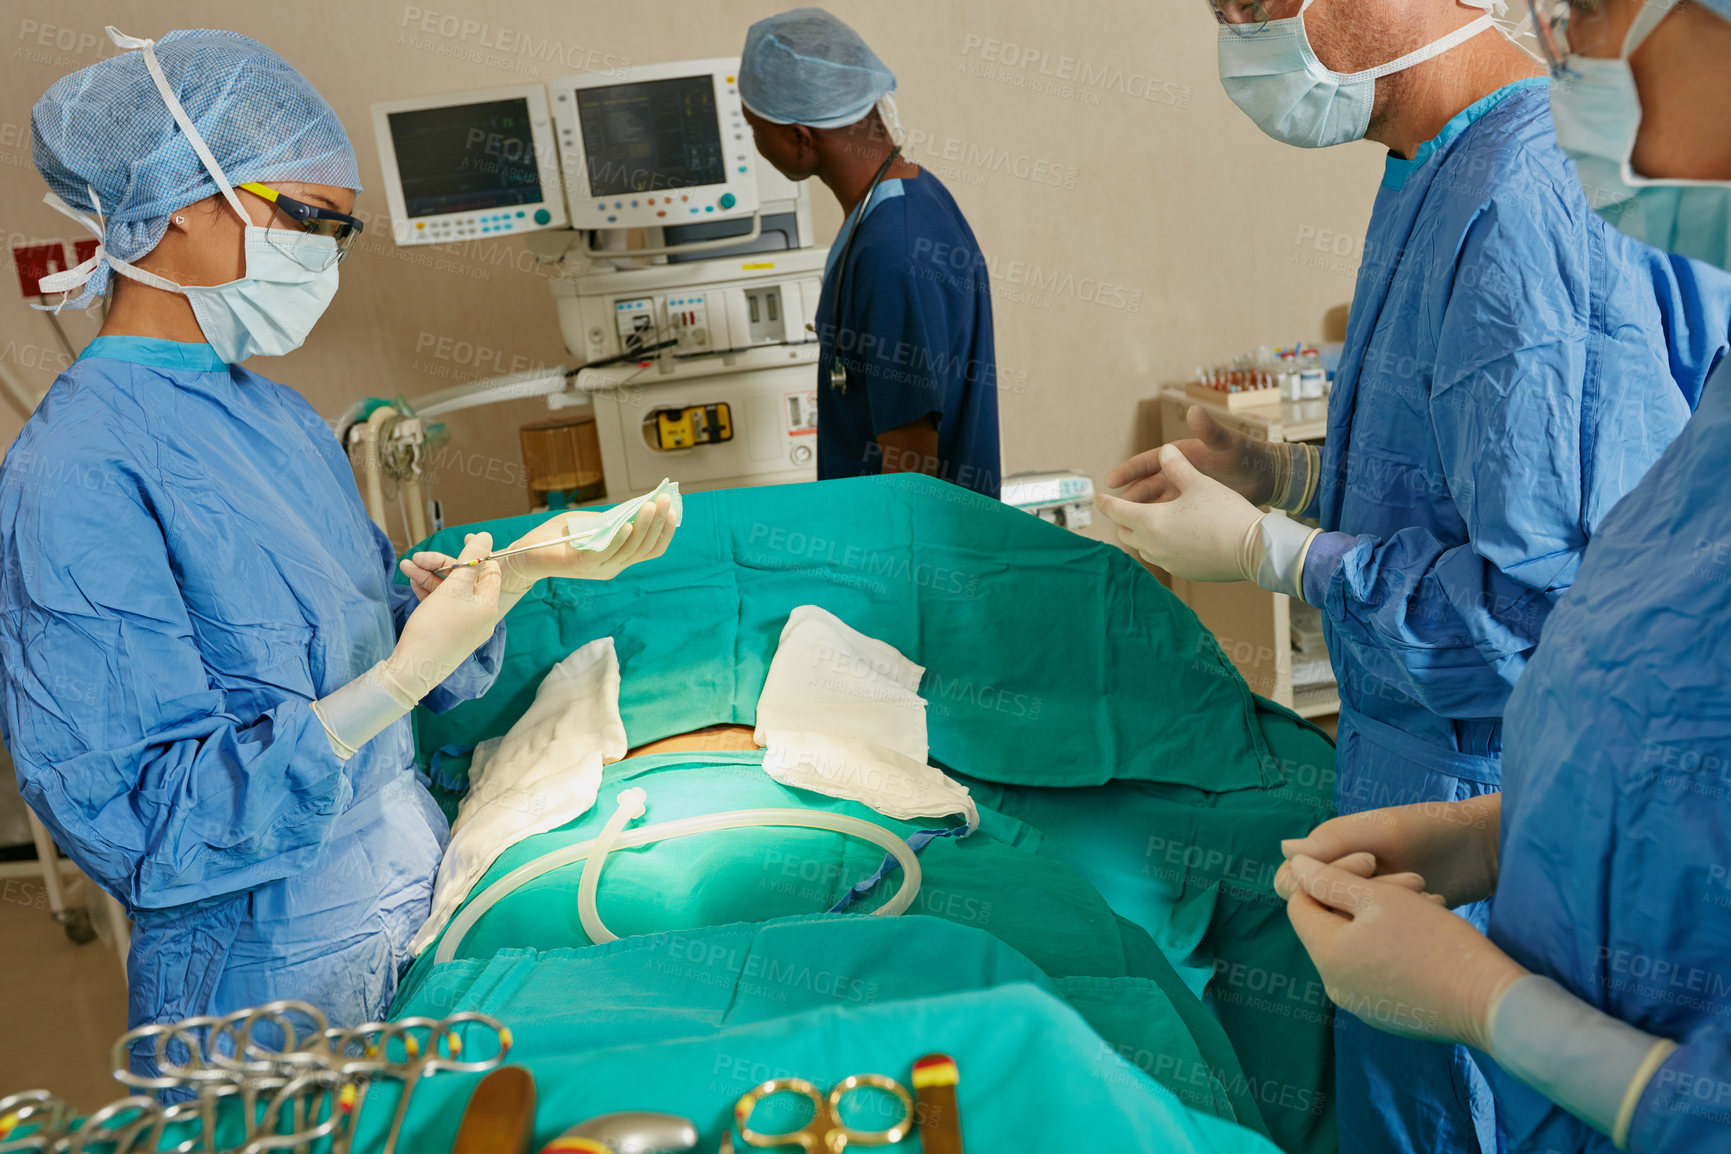 Buy stock photo Shot of a team of surgeons preparing for a surgical procedure